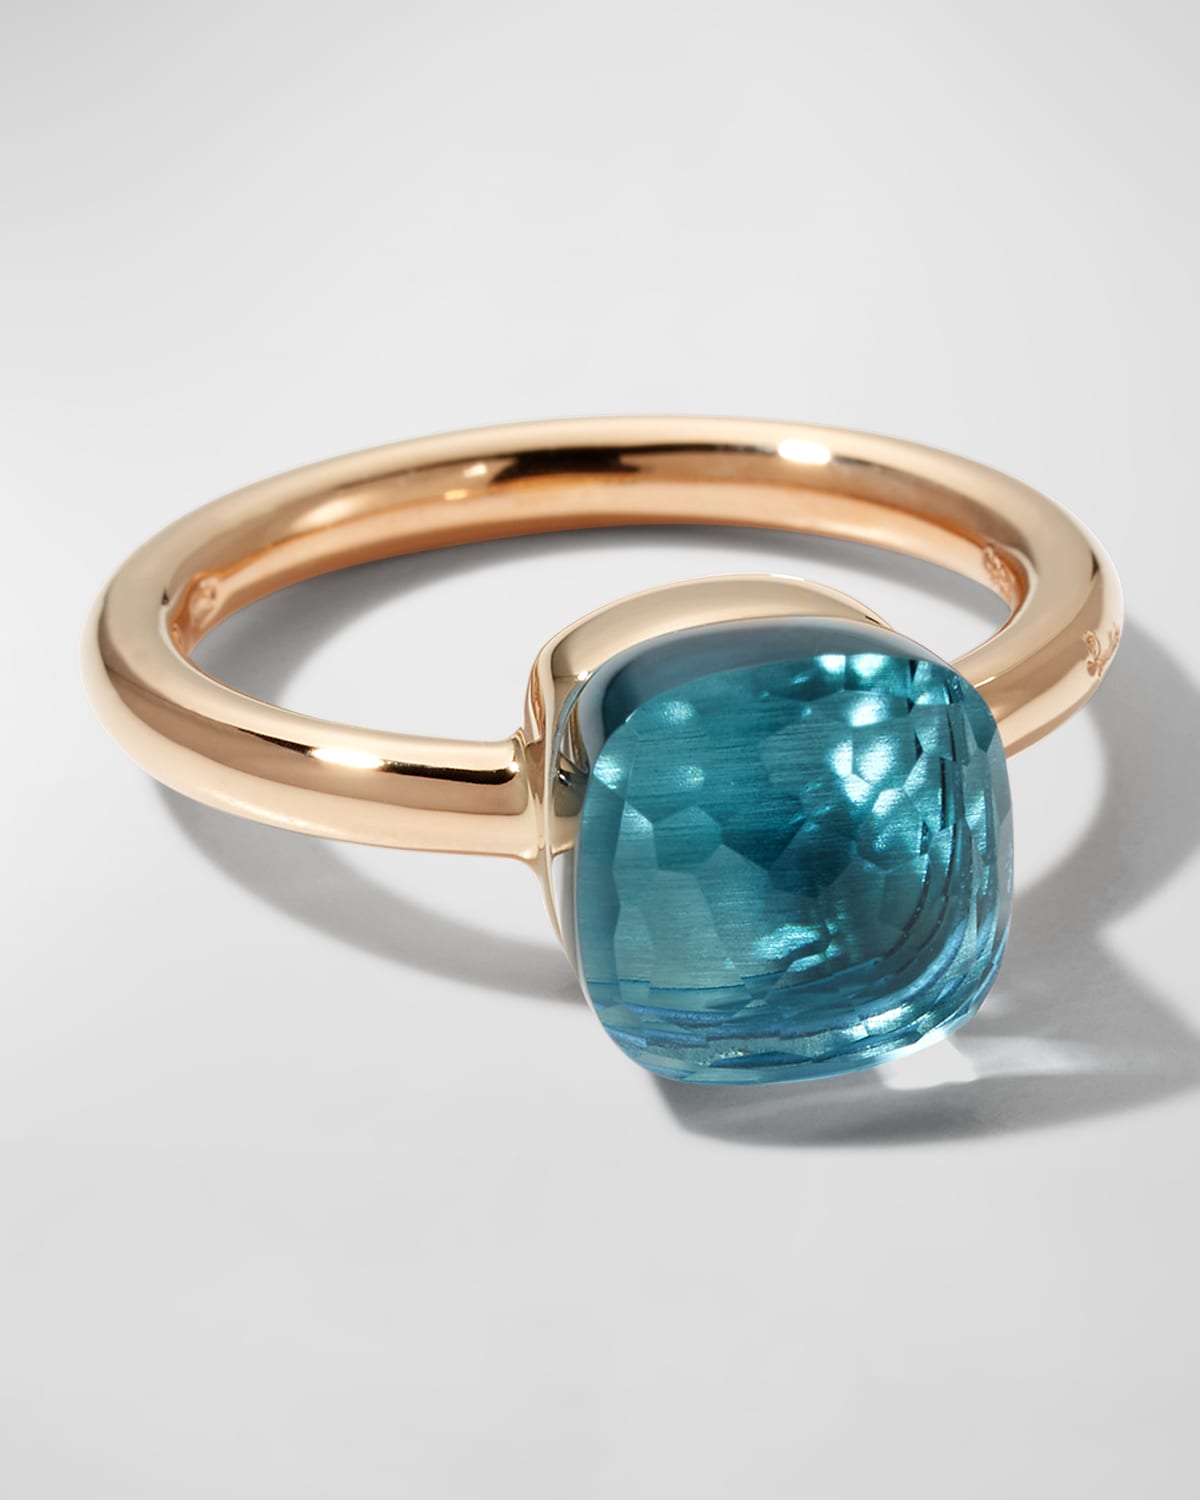 18K White Gold and Rose Gold Nudo Petit Ring with Sky Blue Topaz, Size 50